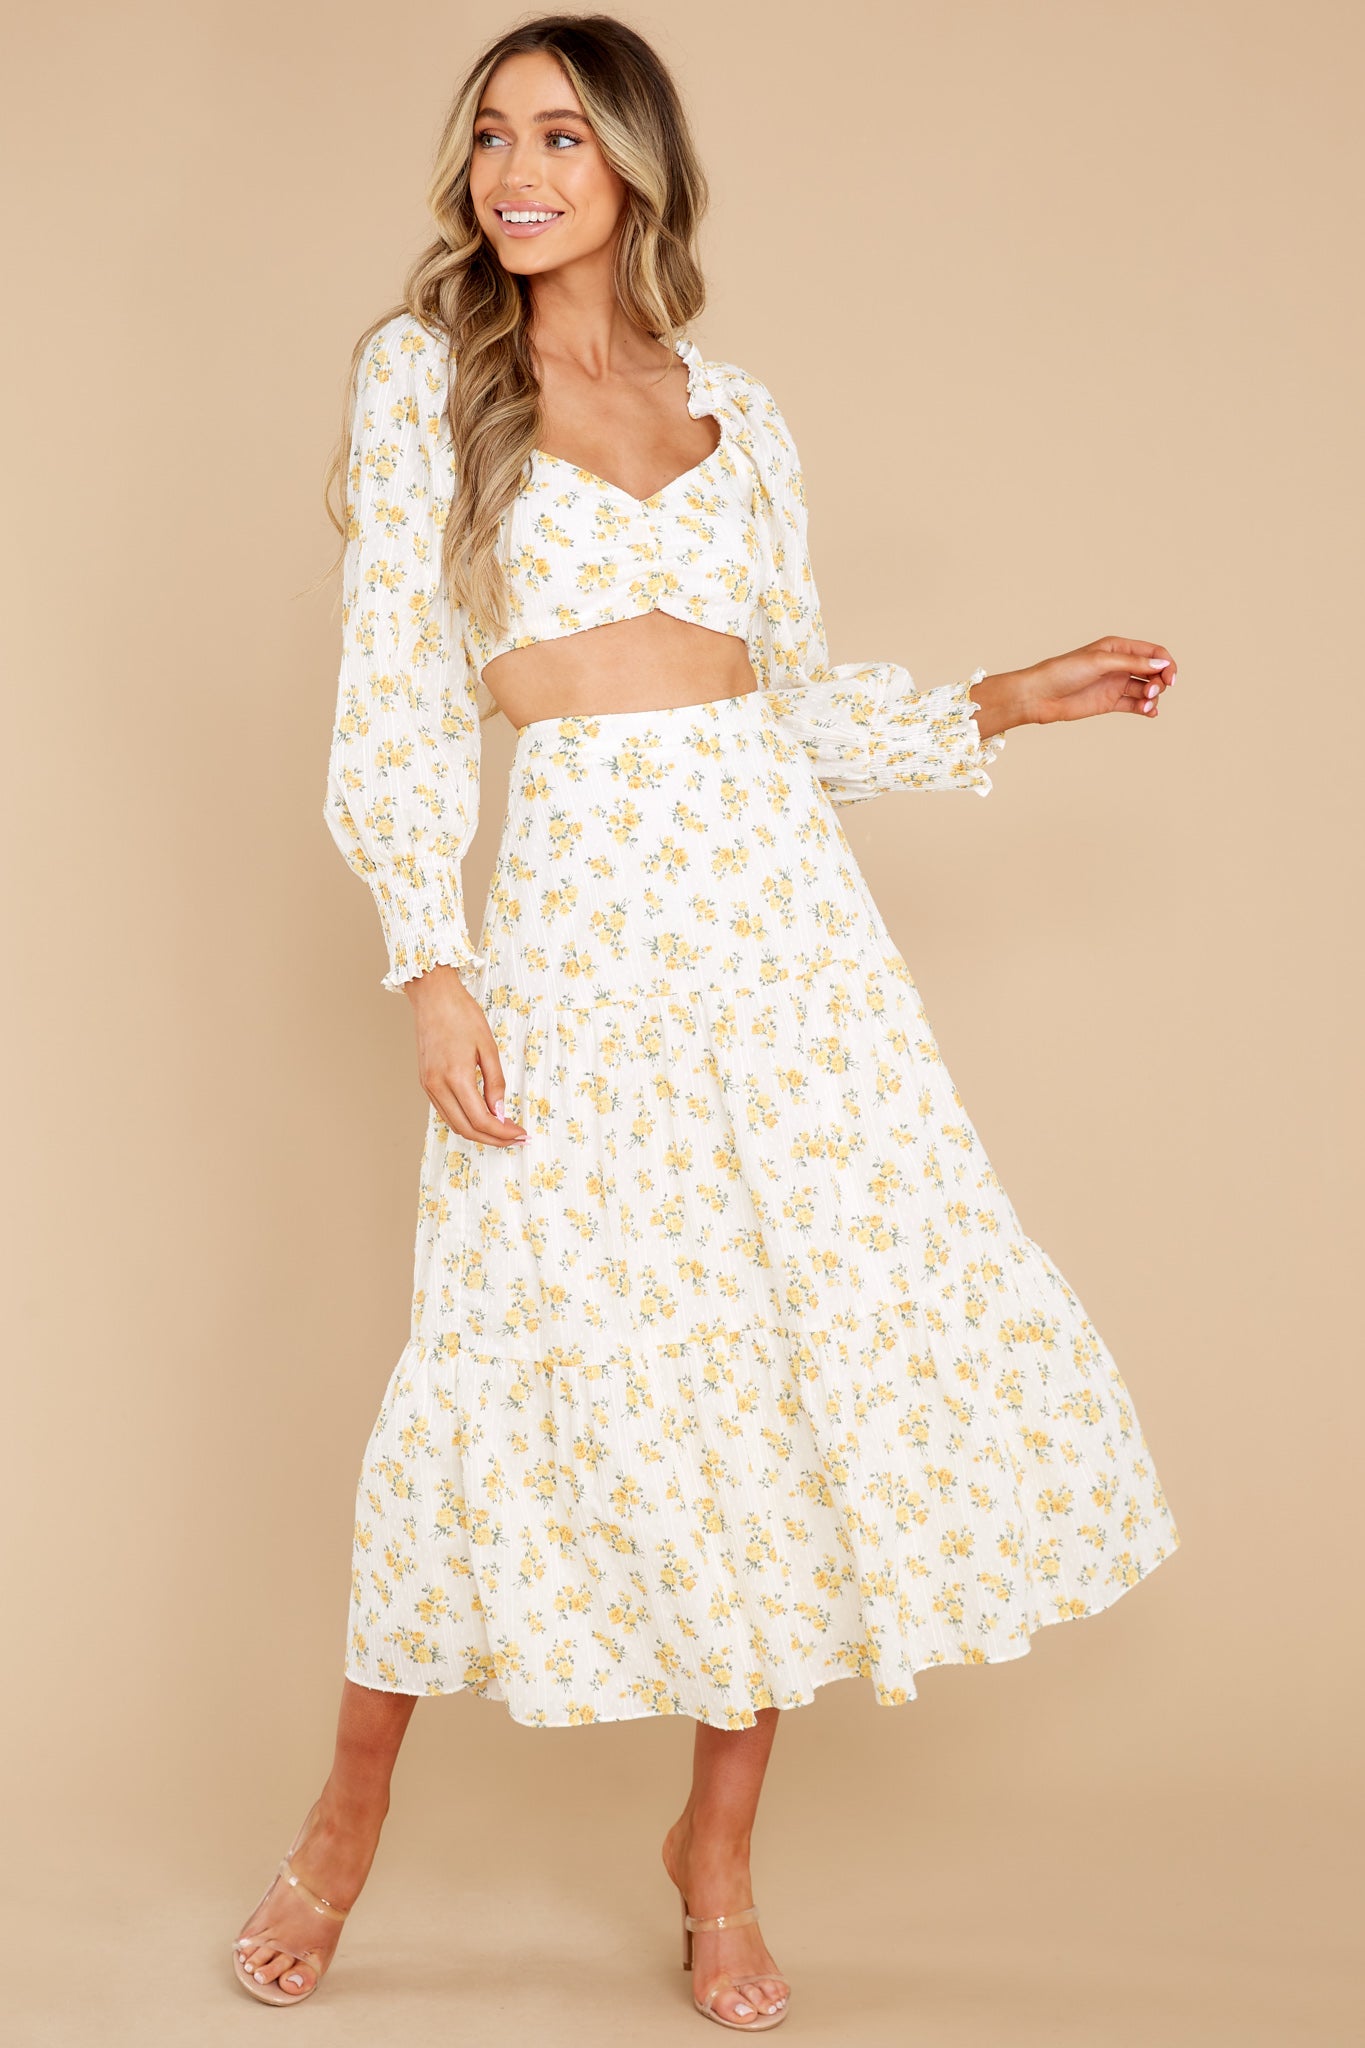 2 In Your Arms White And Yellow Floral Print Top at reddress.com